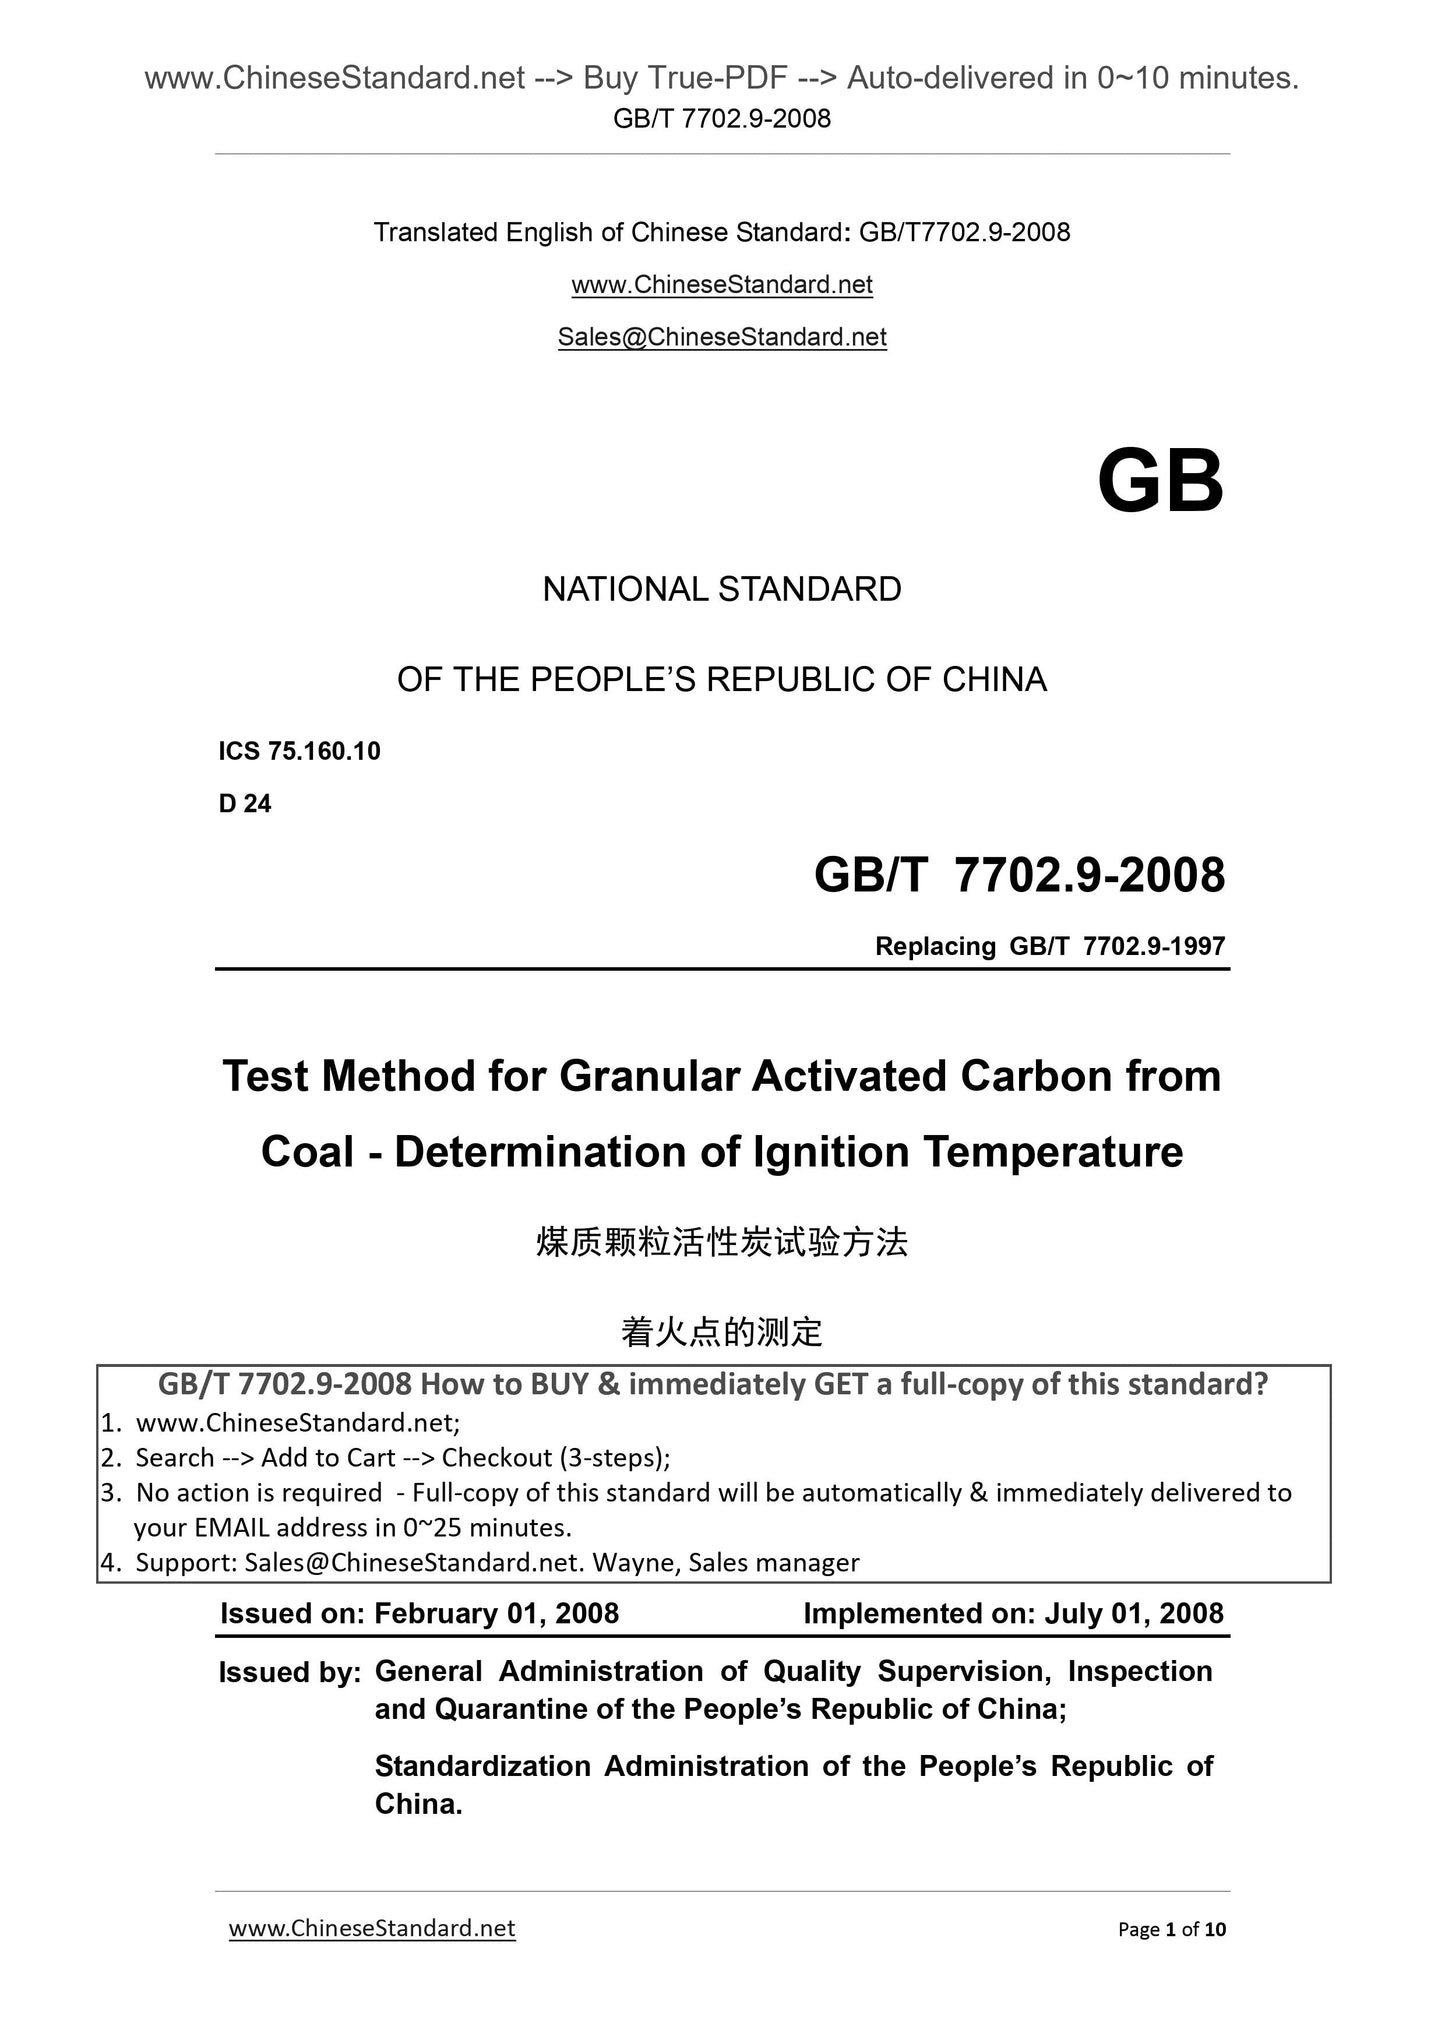 GB/T 7702.9-2008 Page 1